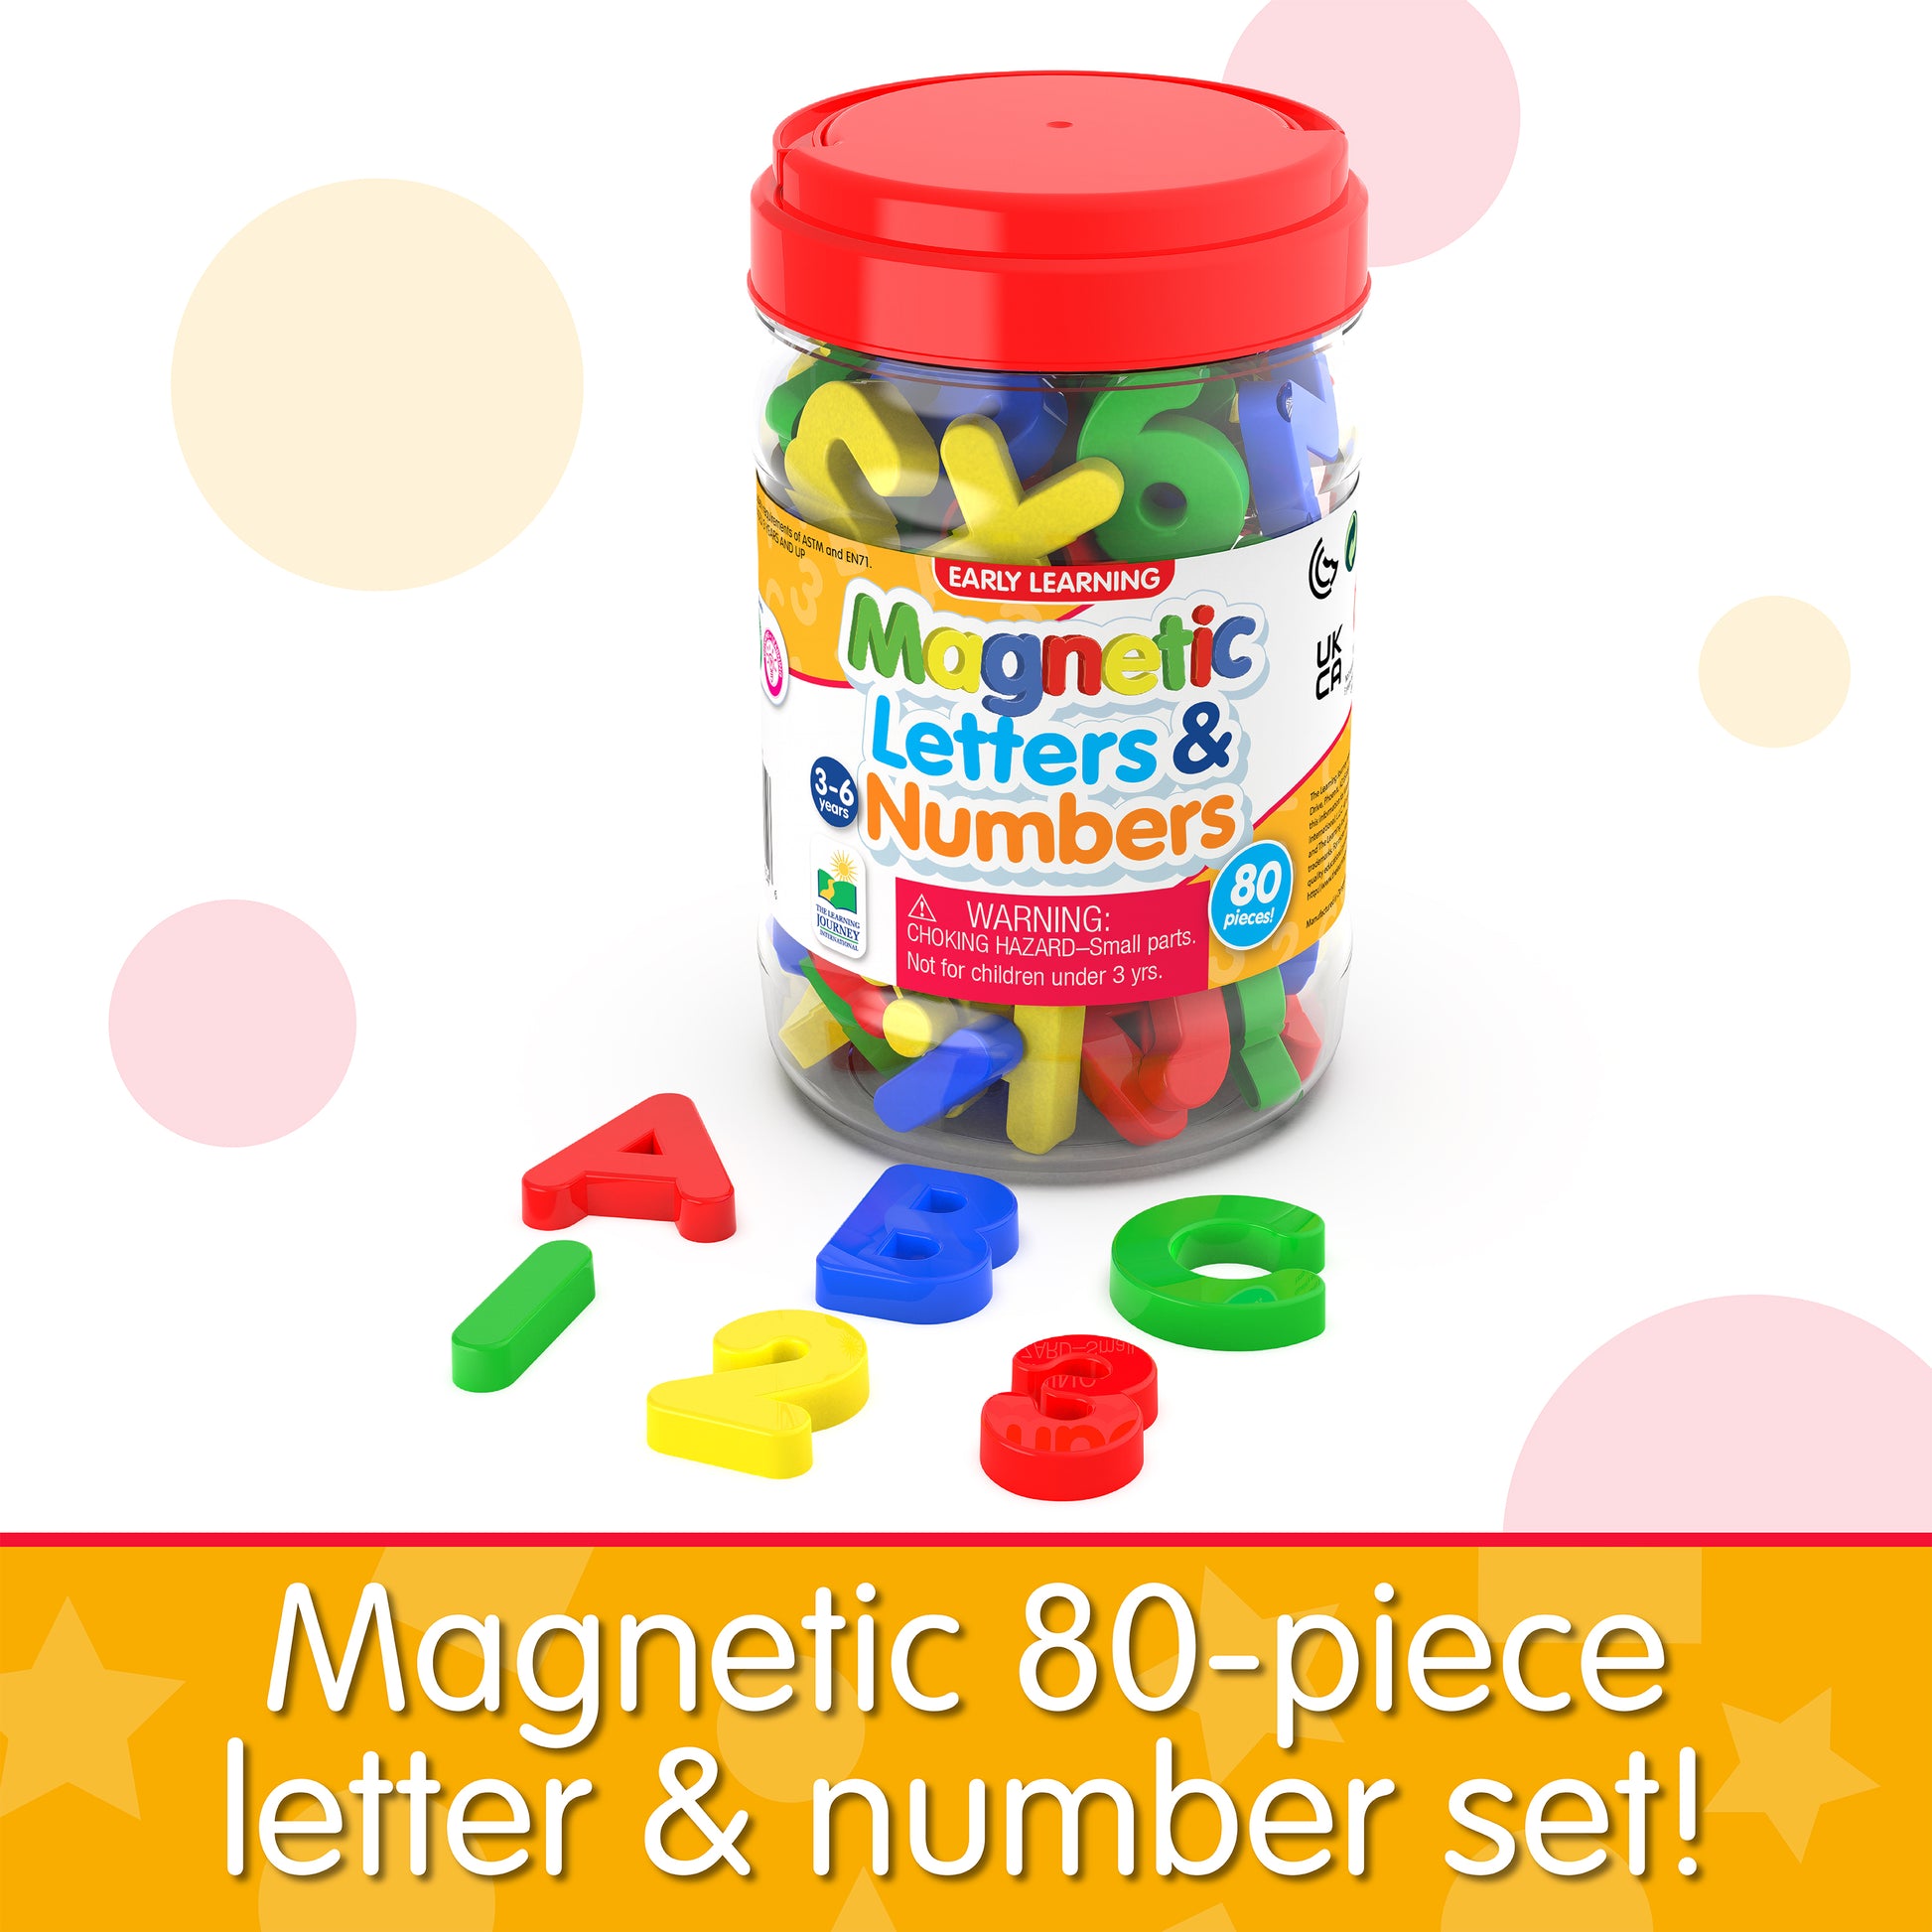 Infographic about Magnetic Letters and Numbers that says, "Magnetic 80-piece letter and number set!"